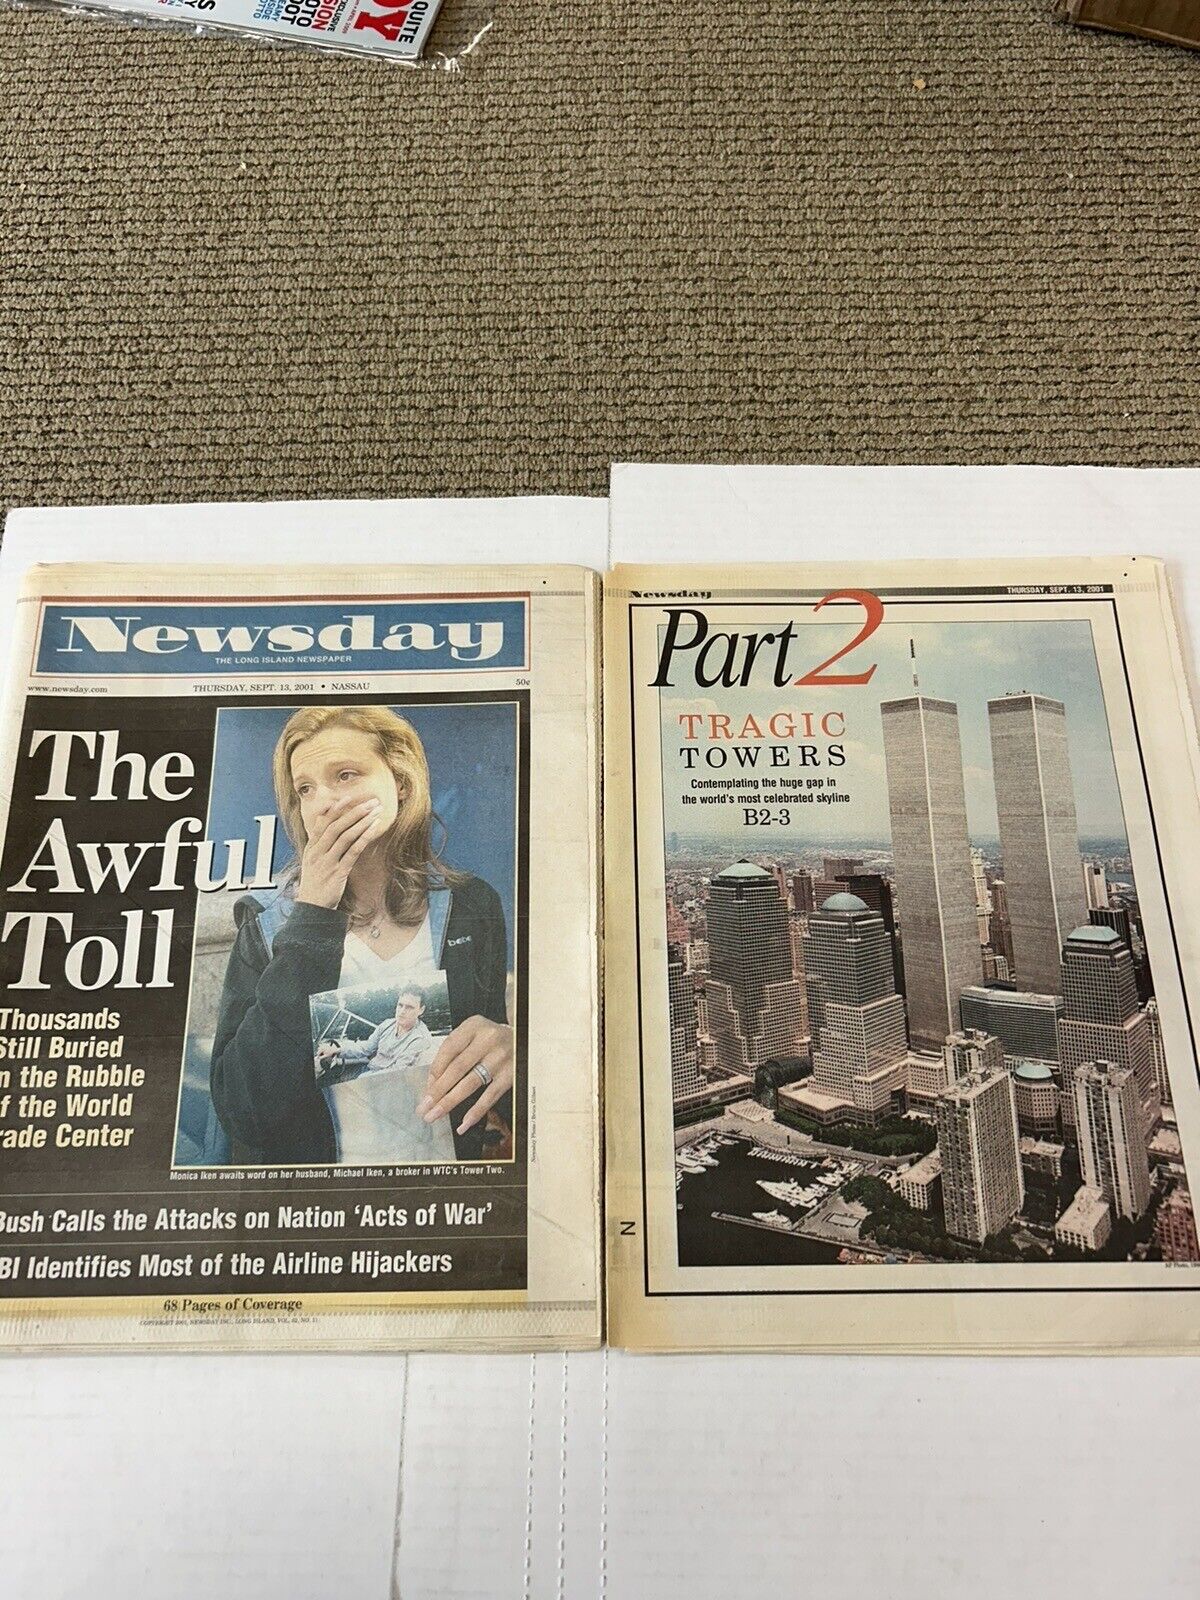 NEWSDAY LONG ISLAND NEWSPAPERS SEPTEMBER 13, 2001 TWIN TOWERS EXCELLENT CONDITIO